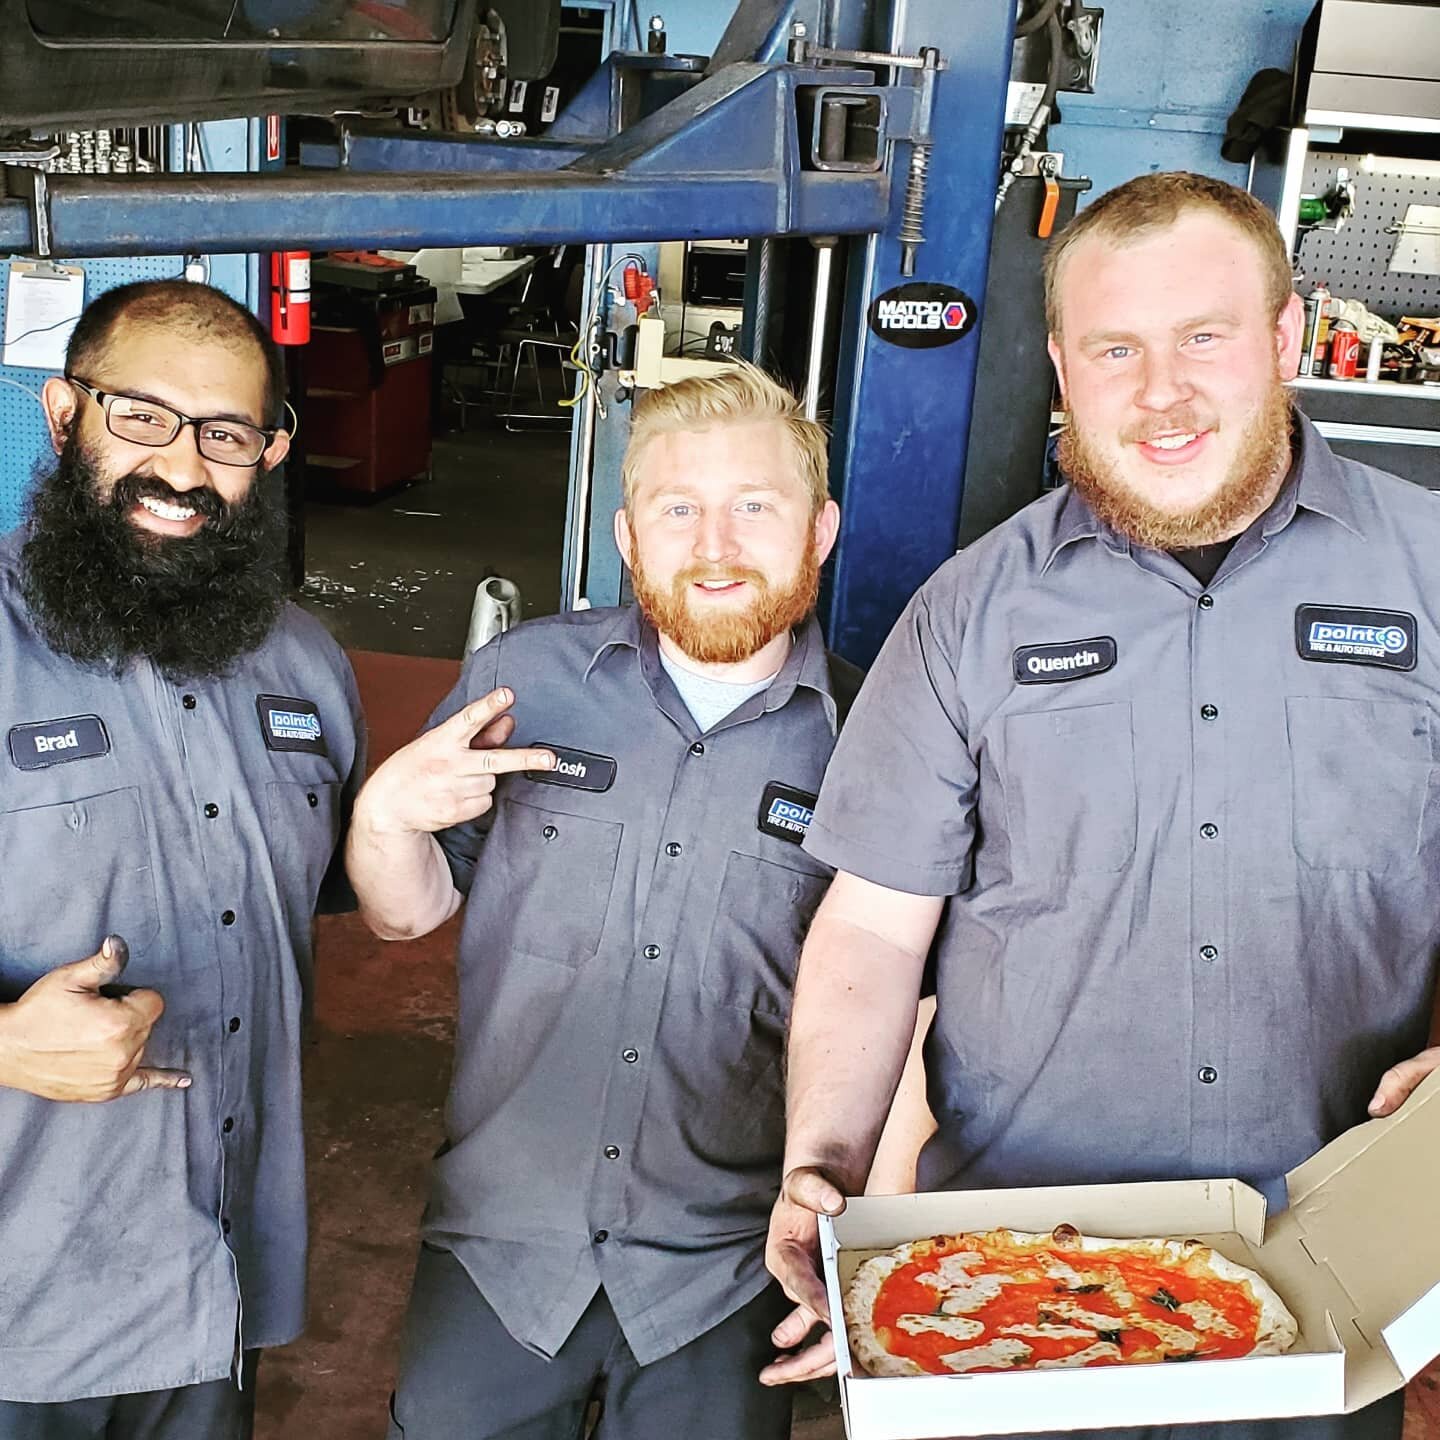 making pizza in the streets of Seattle one stop at the time
The new old fashion way tomato sauce mozzare and basil we go Classic

#seattle
#seattlefoodie #pizzalover #pizzatime #seattlefoodtruck